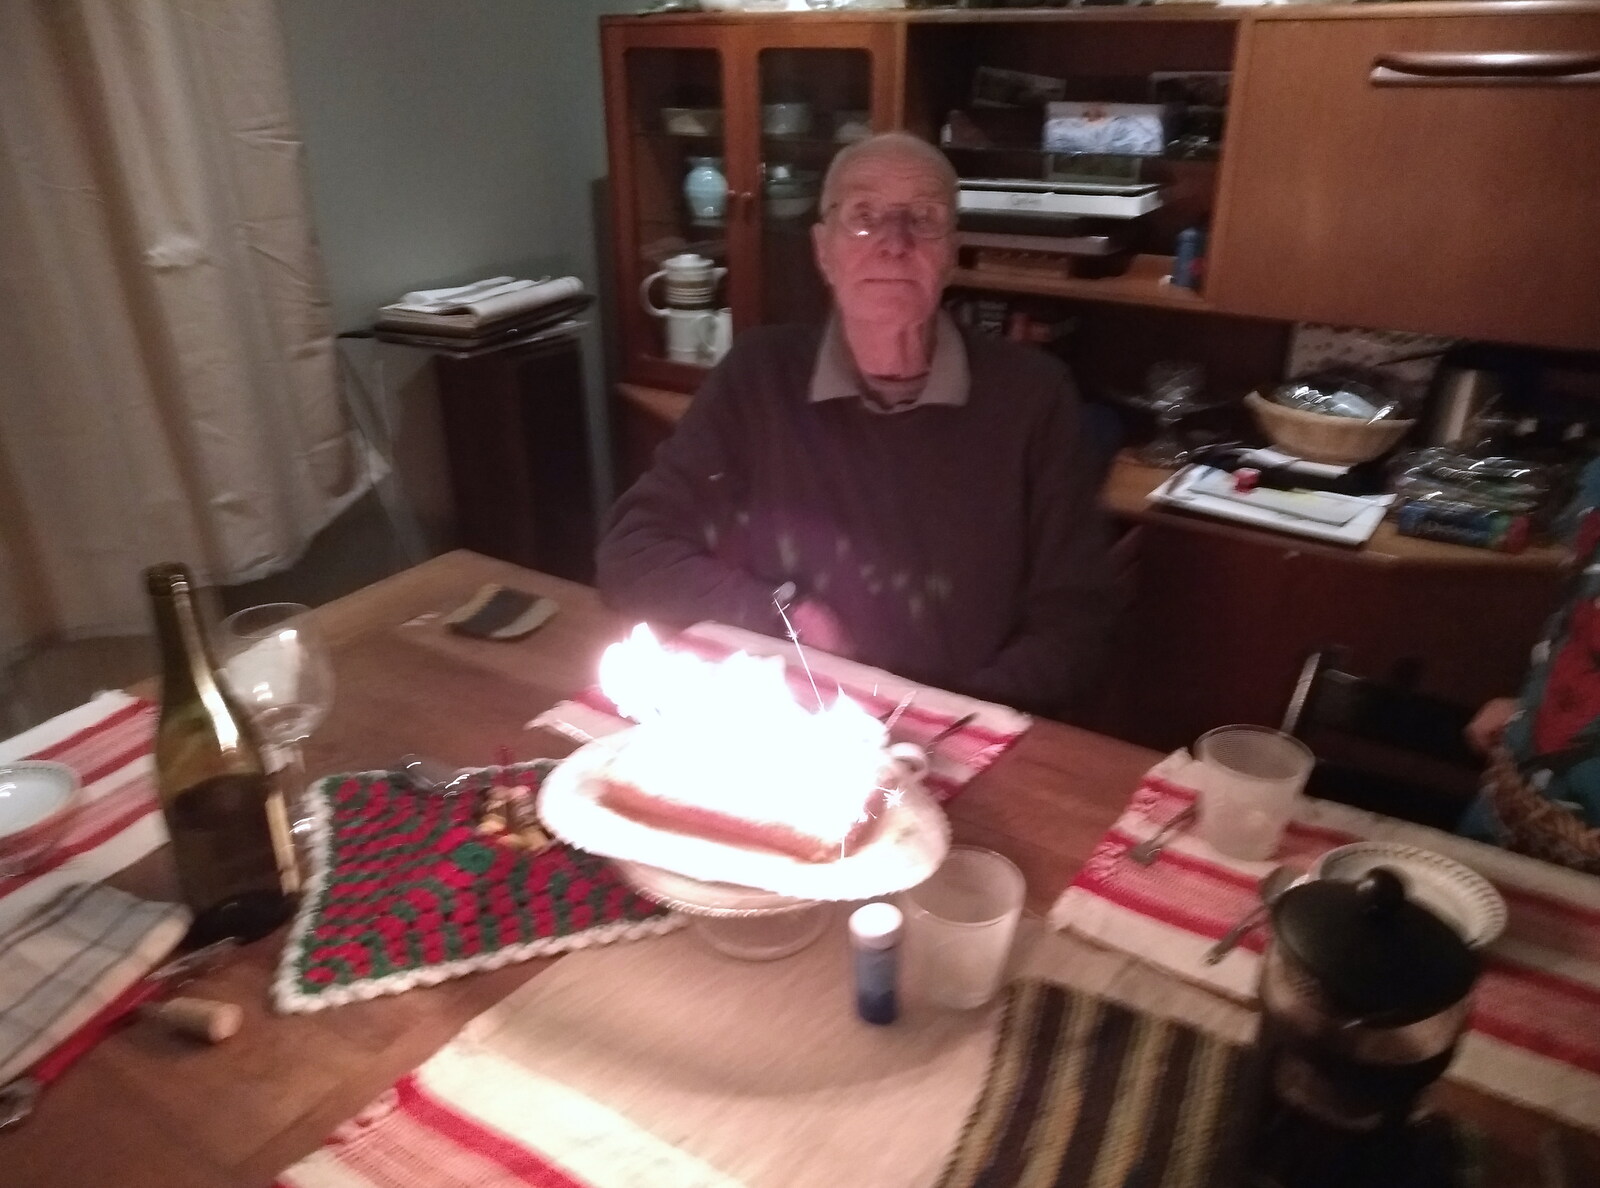 A Walk Around Eye, and the Return of Red Tent, Suffolk and London - 25th February 2018: Grandad's cake